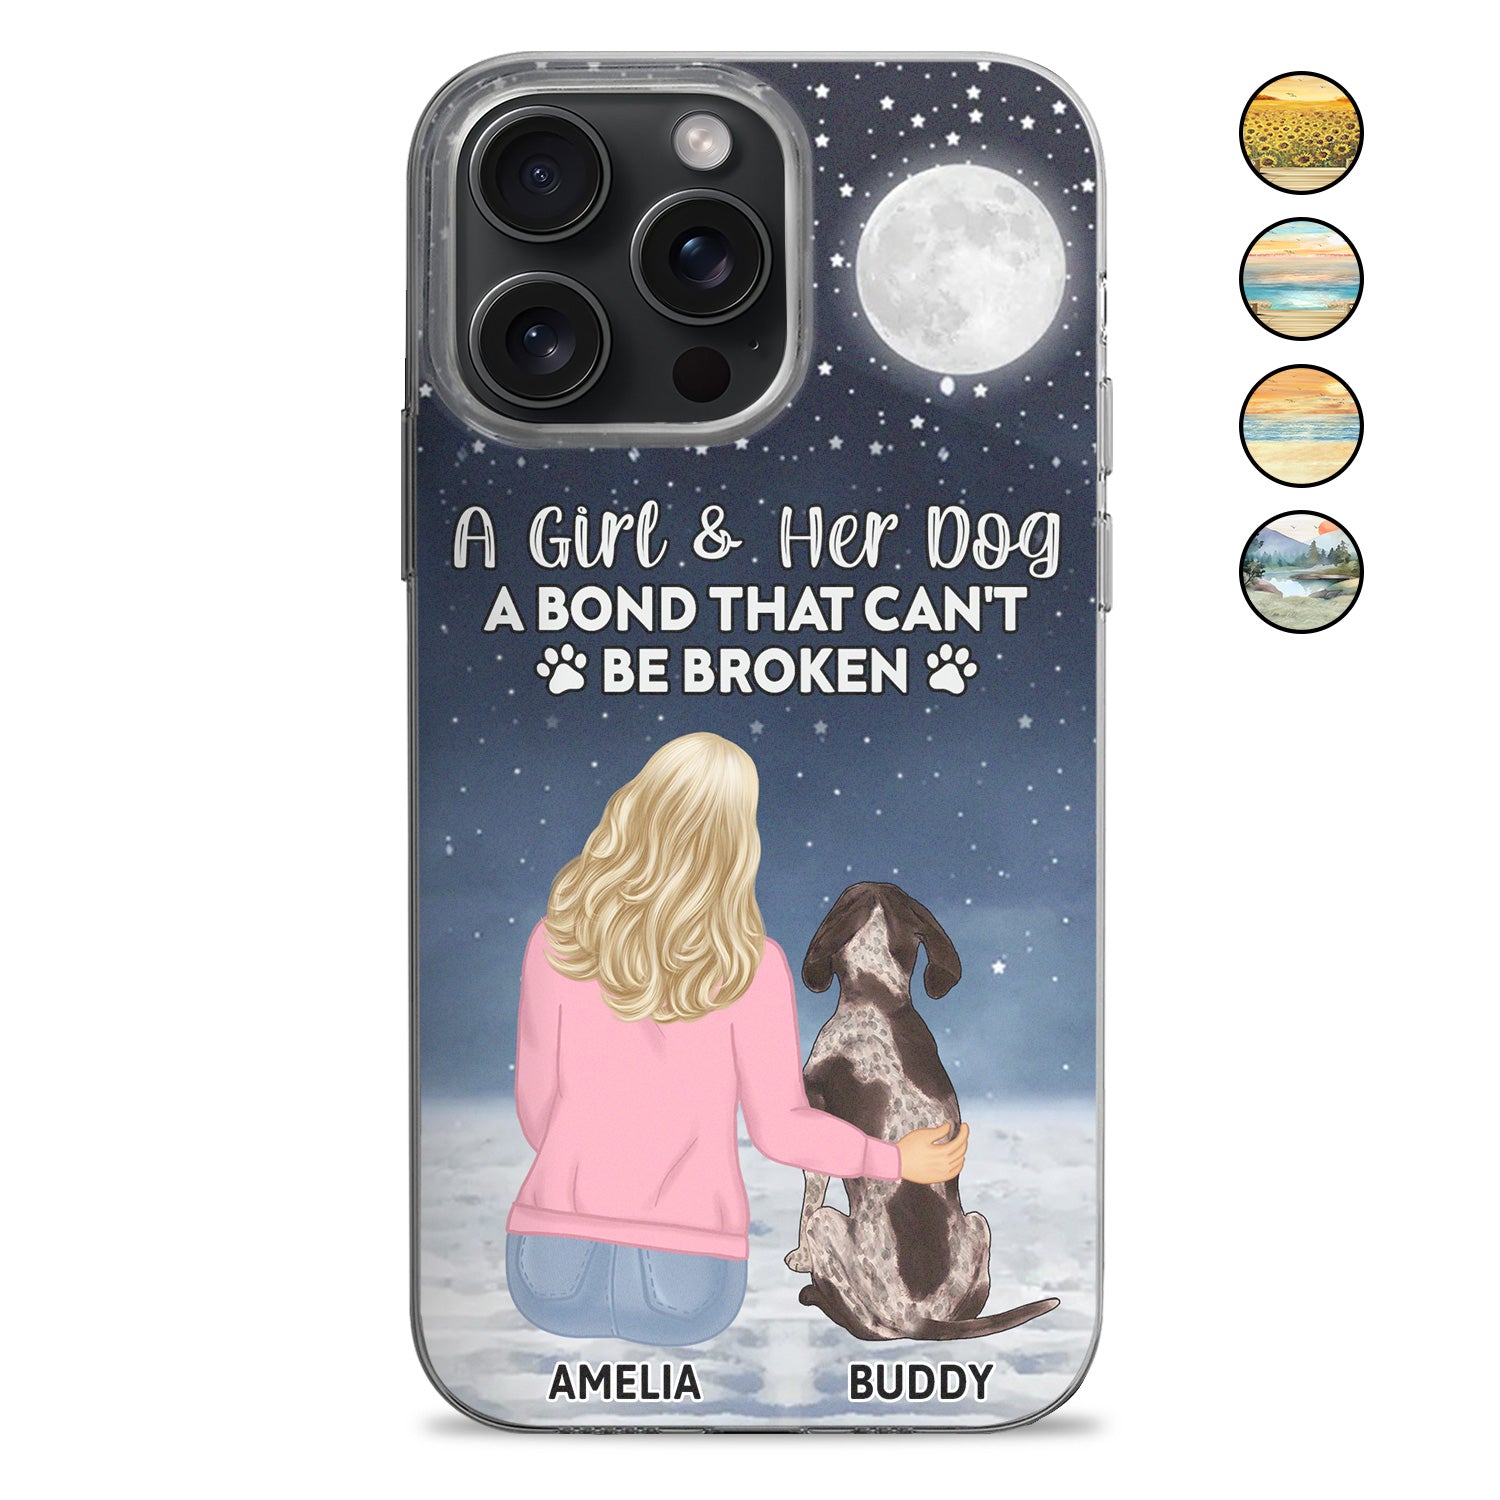 A Bond That Can't Be Broken - Gift For Dog Lovers, Dog Mom - Personalized Clear Phone Case